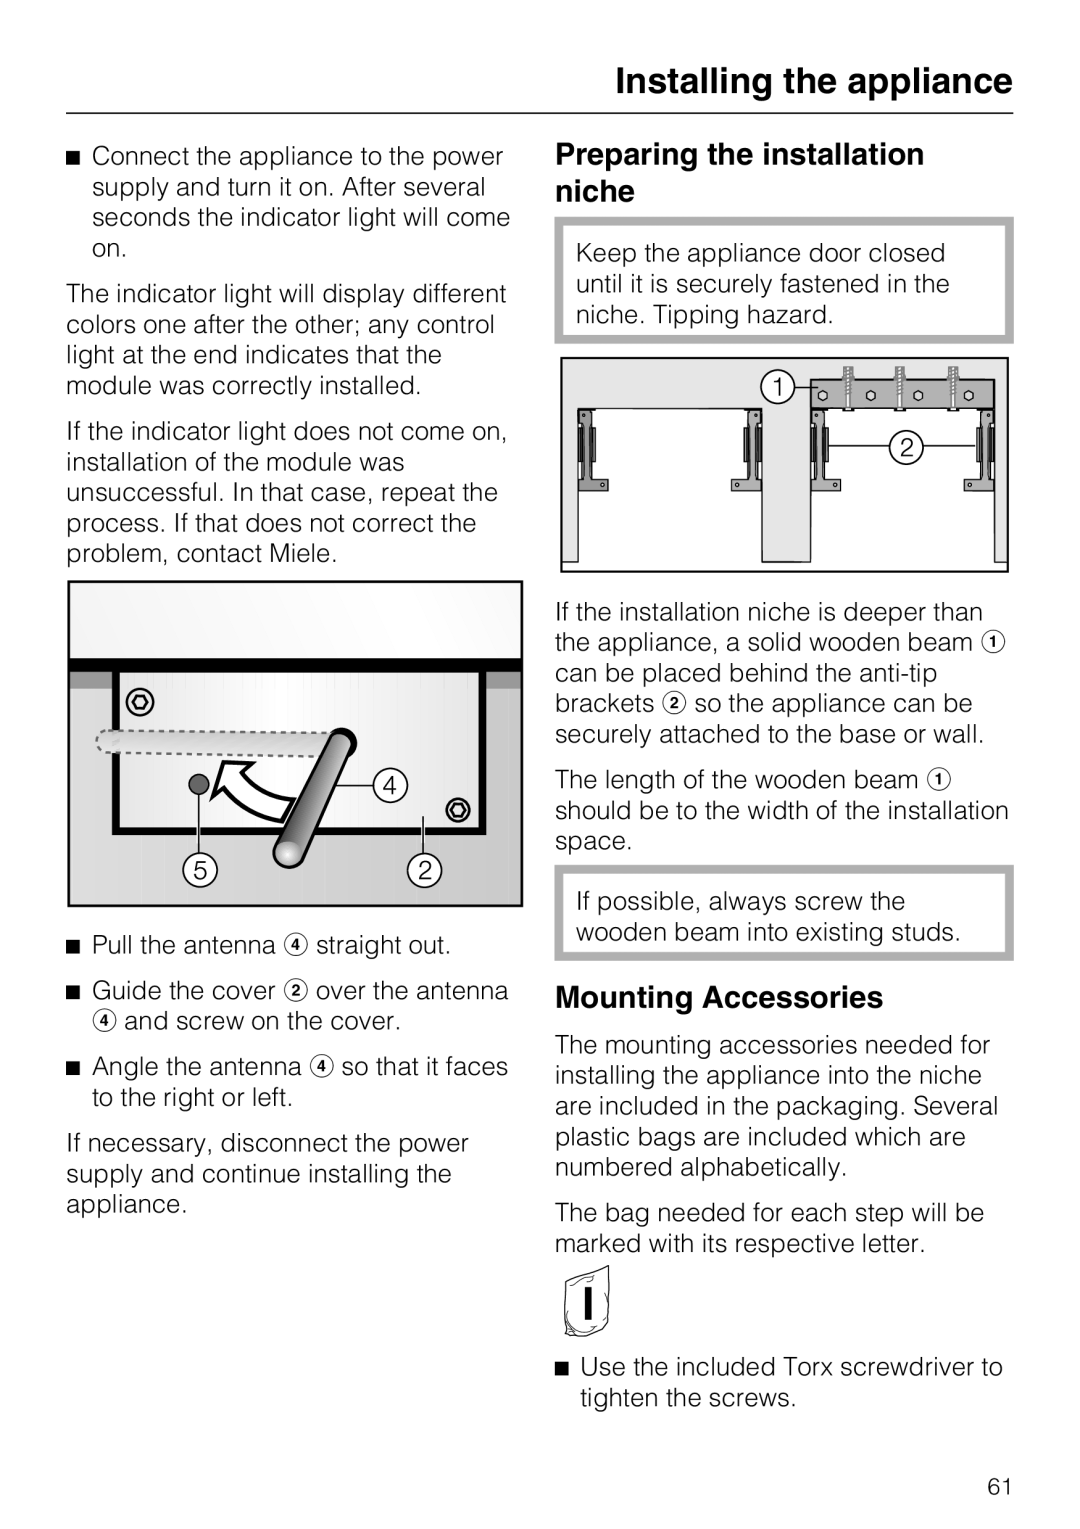 Miele F1471VI installation instructions Preparing the installation niche, Mounting Accessories, Installing the appliance 